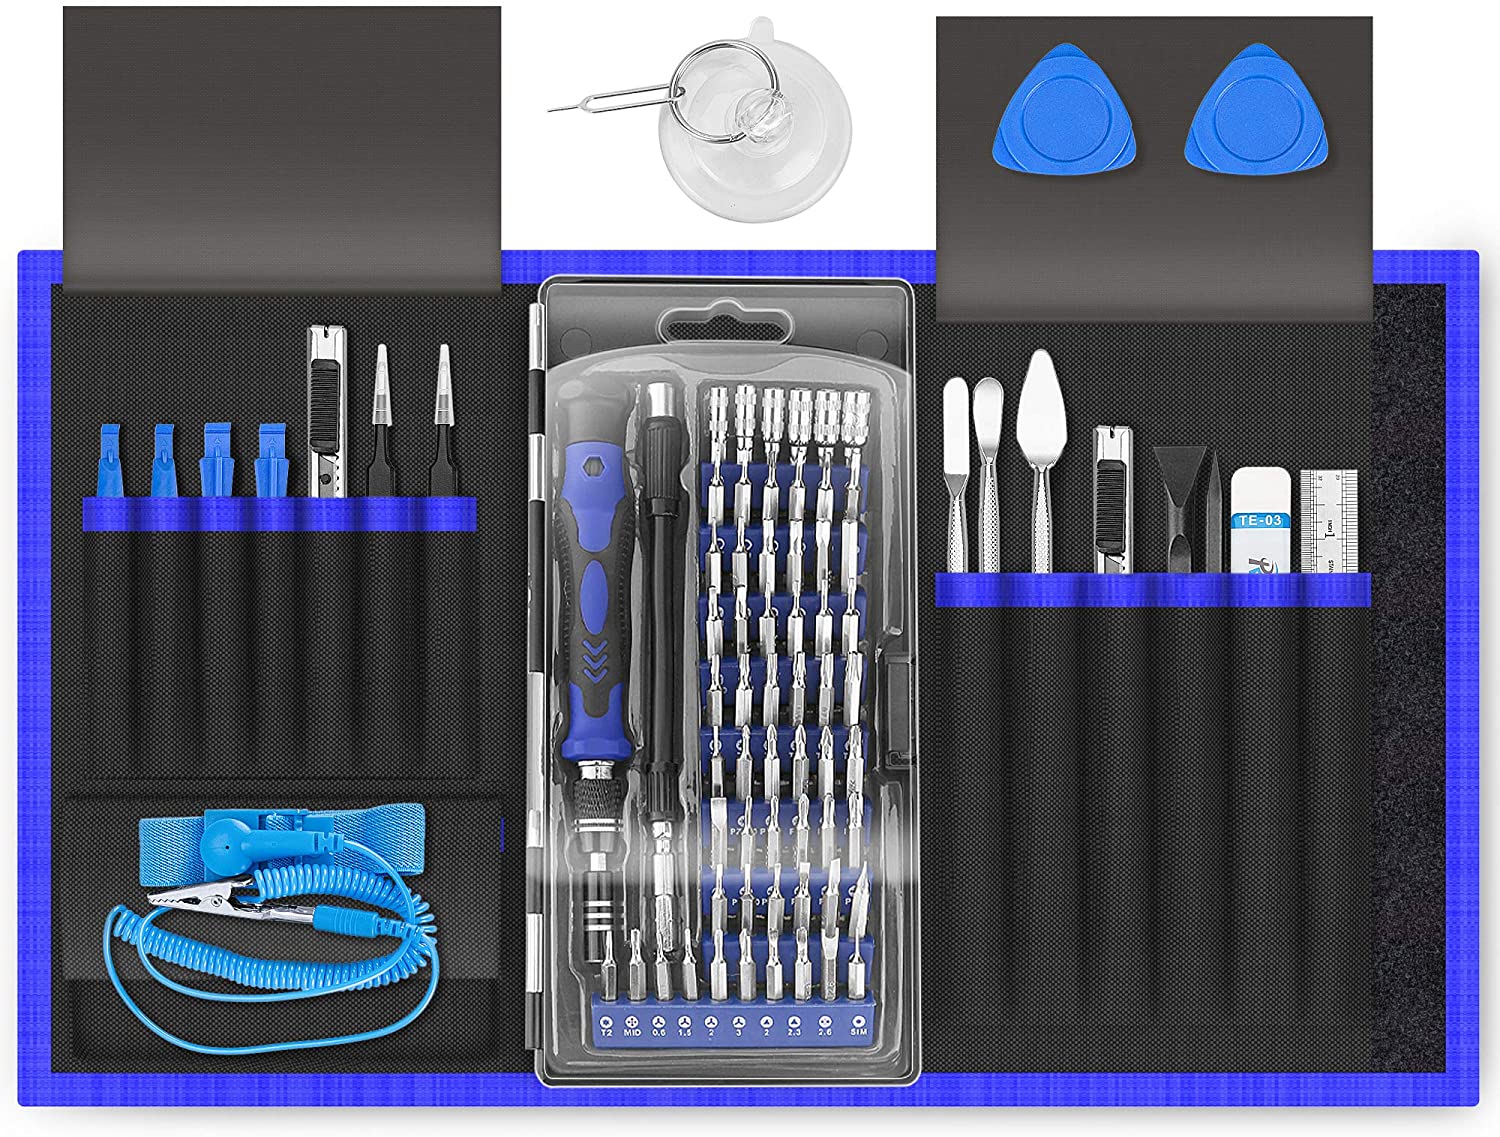 PC ORIA Precision Screwdriver Set Computer Repair Tool Kit for iPhone 120 in 1 Screwdriver Kit with 101 Bits Computer Mini Magnetic Screwdriver Set Toys